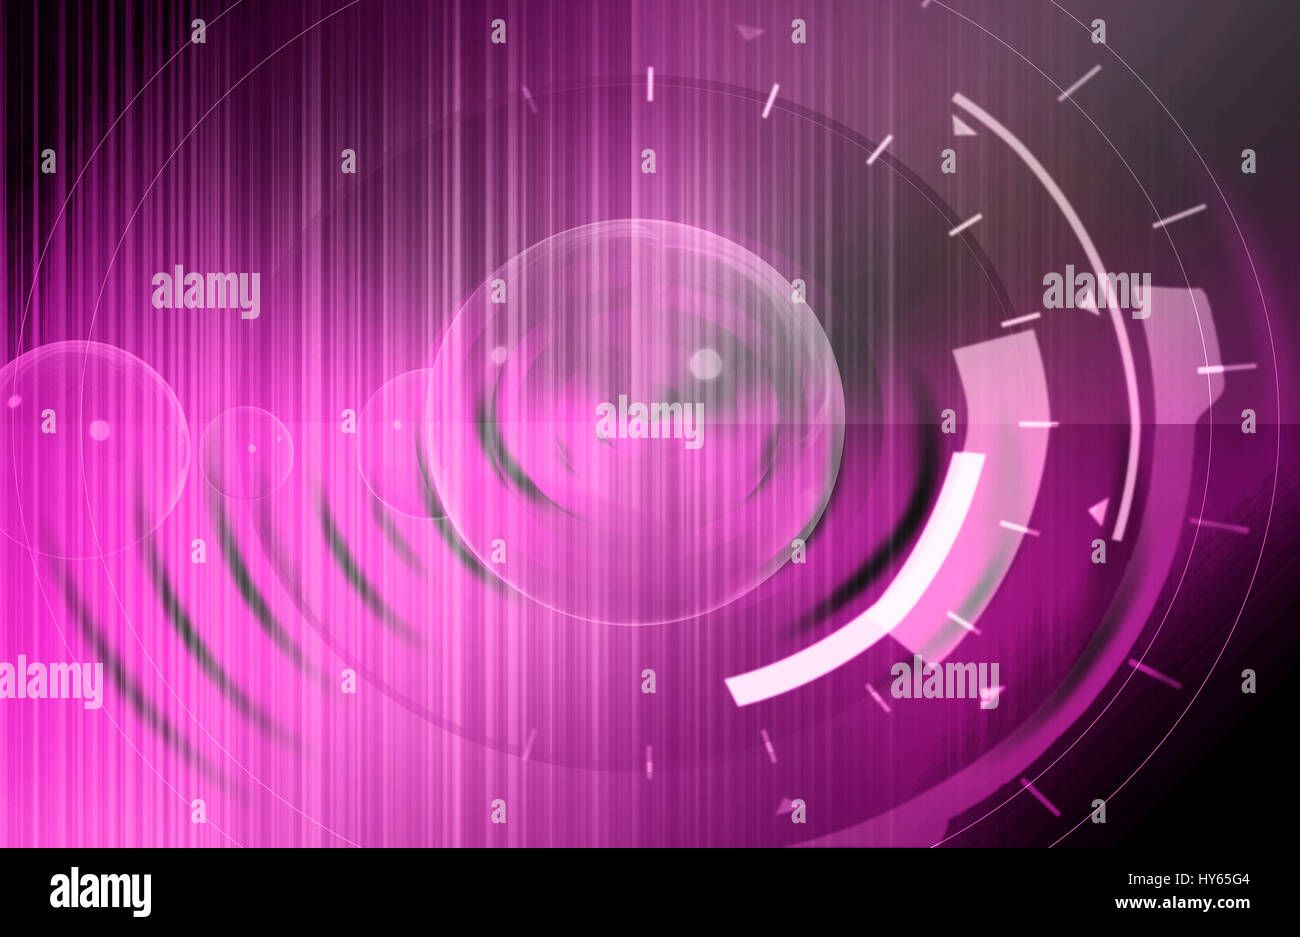 Abstract Digital virtual high-tech background with bright pink colors and special effects. Stock Photo